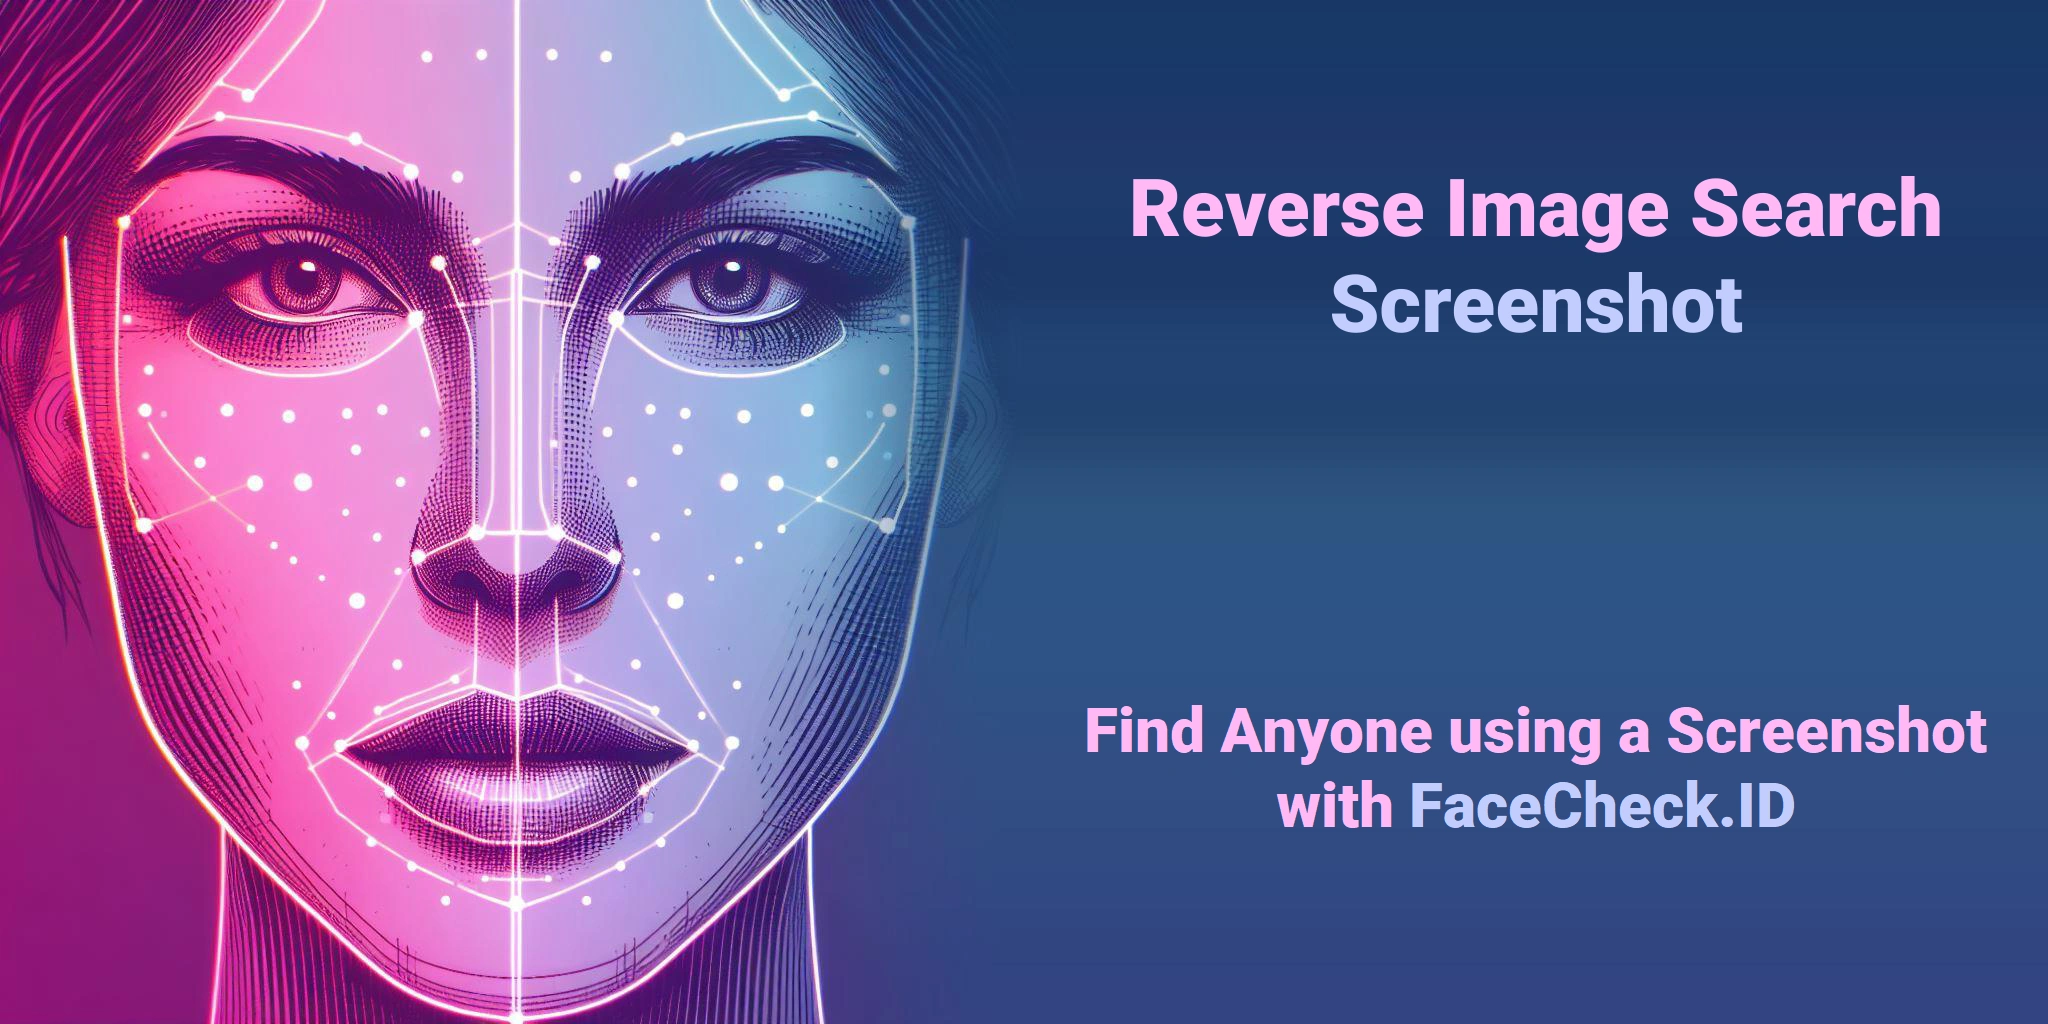 Reverse Image Search Screenshot Find Anyone using a Screenshot with FaceCheck.ID